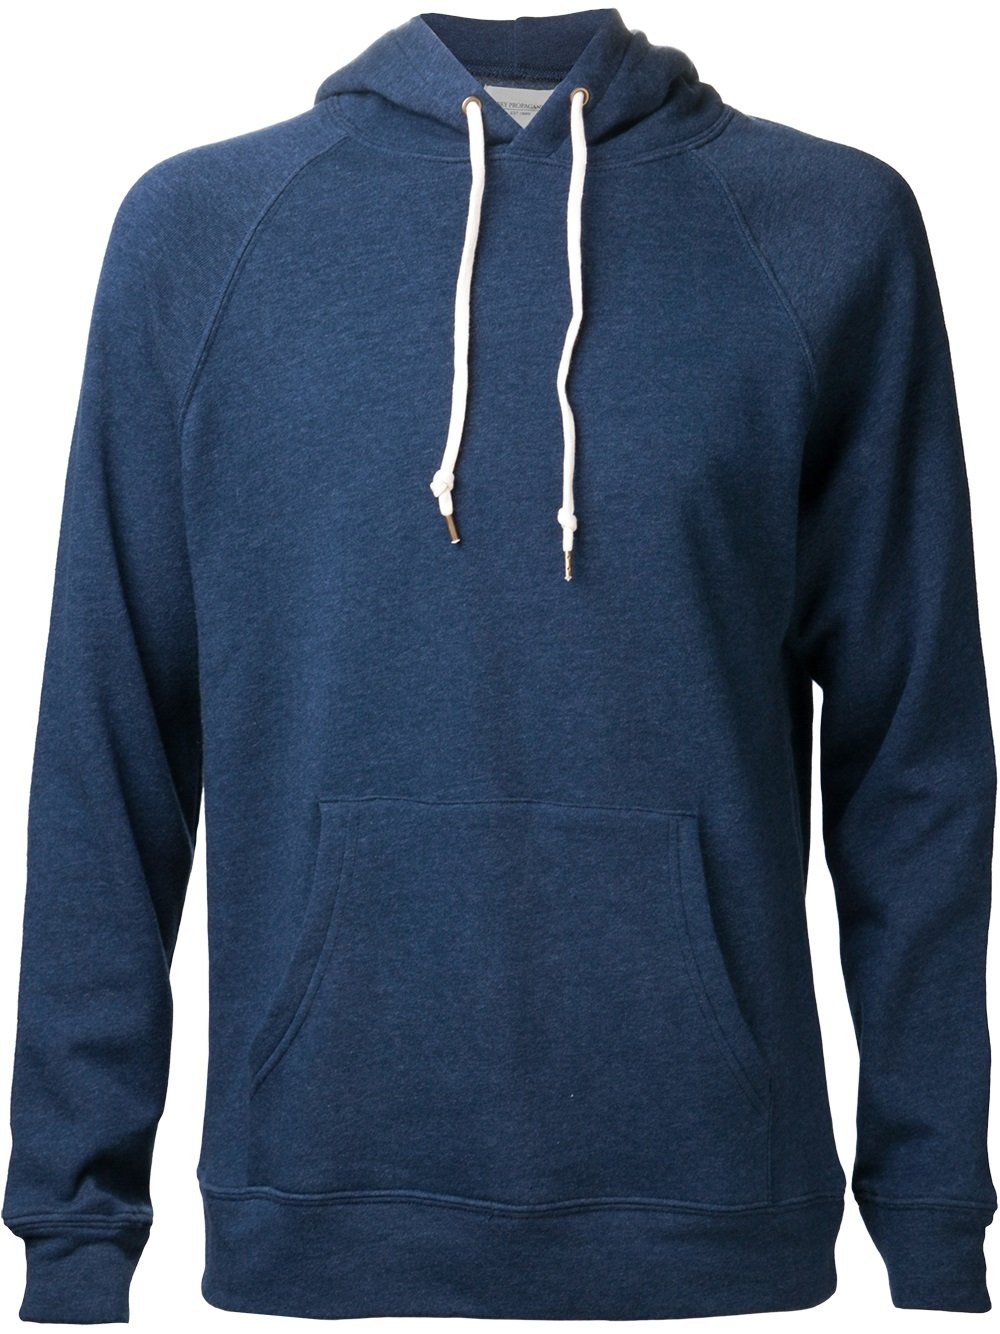 Lyst - Obey Drawstring Hoodie Sweater in Blue for Men